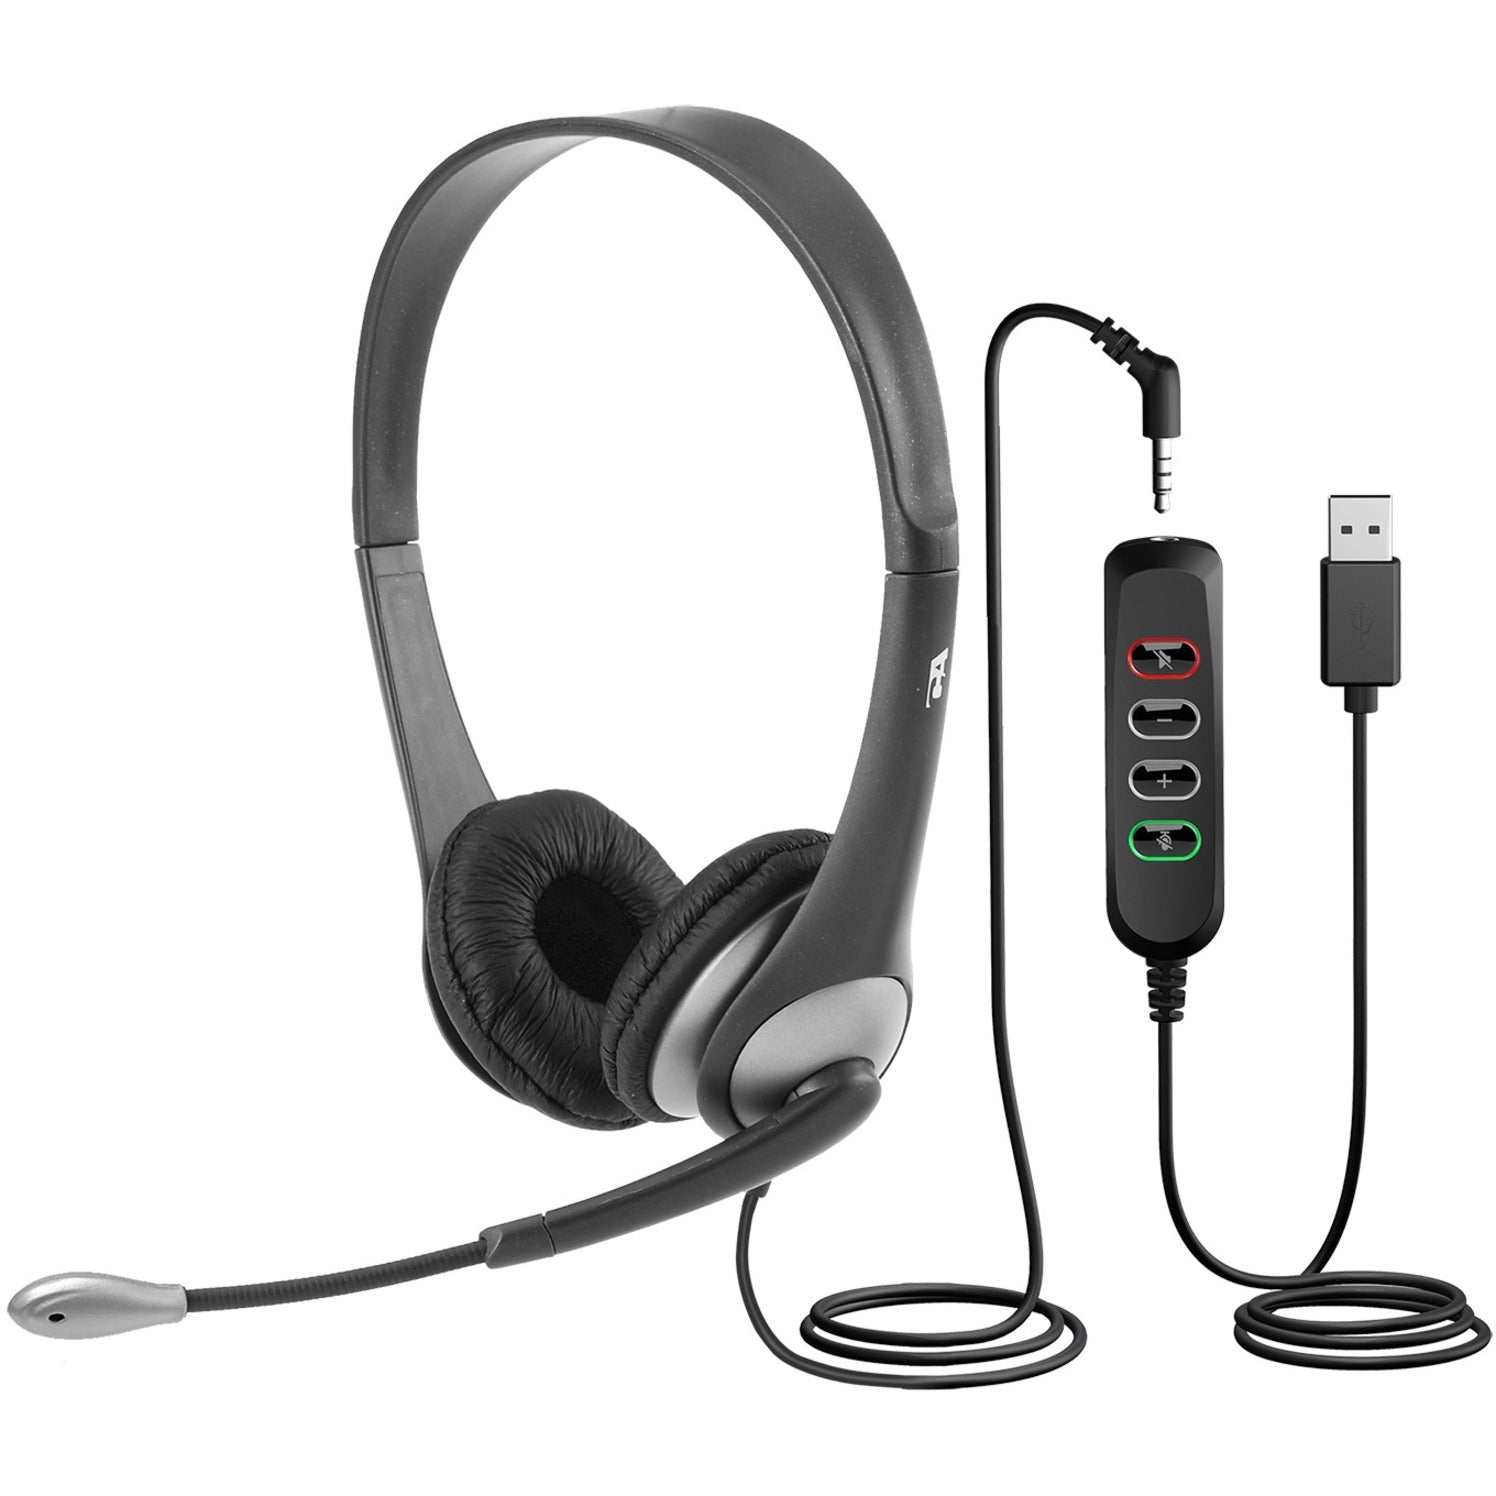 Cyber Acoustics AC-204USB Stereo 3.5mm And USB Controller Headset, Lightweight with Noise Cancelling Microphone